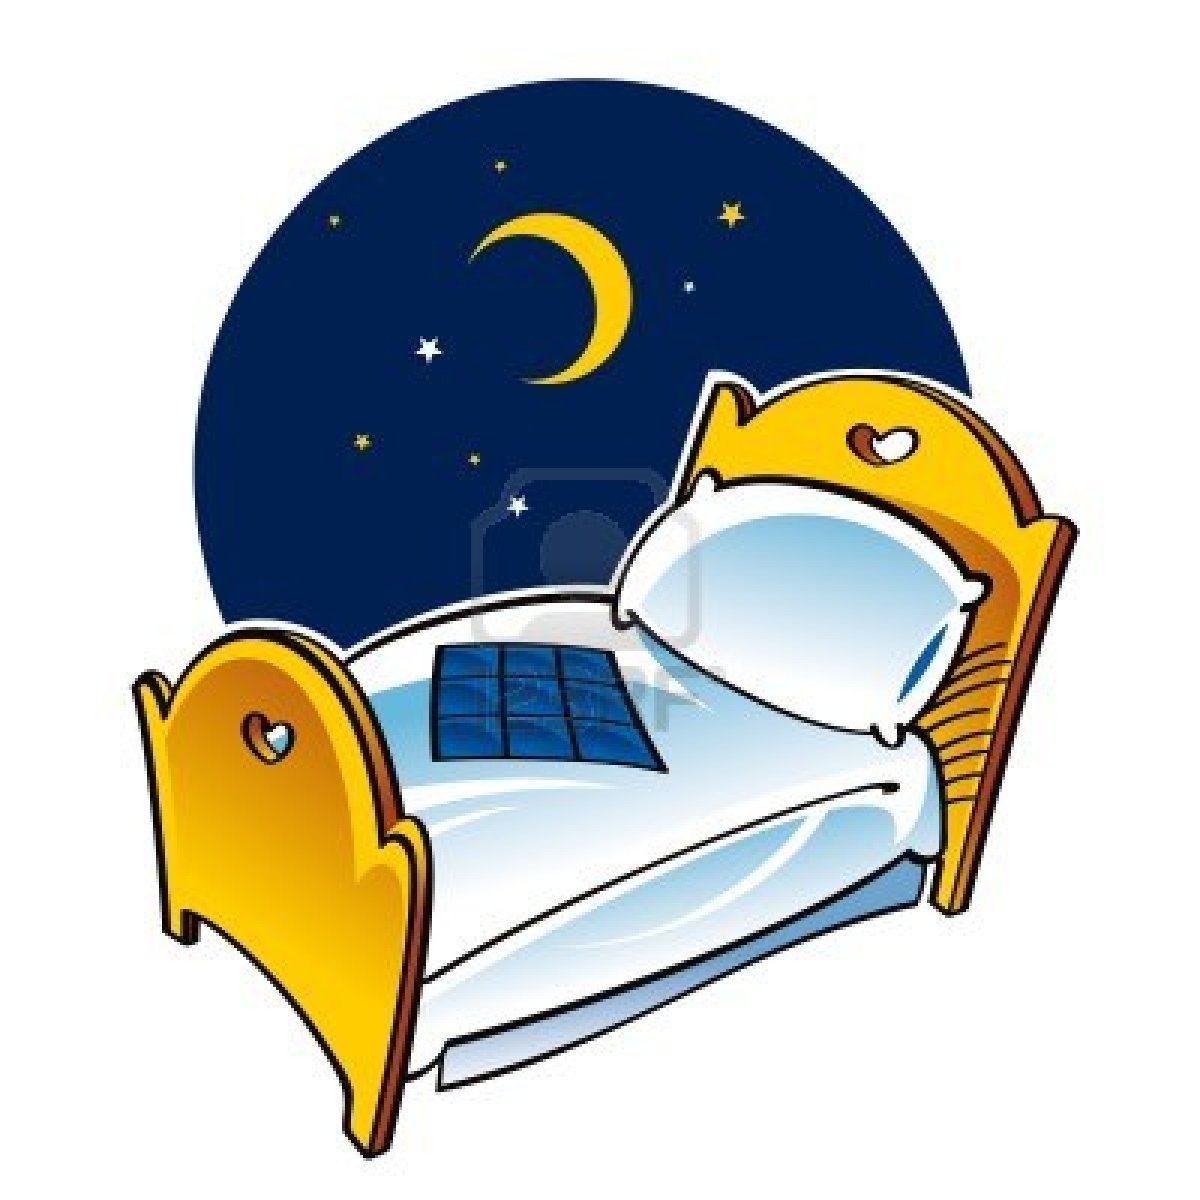 Go To Bed Clipart